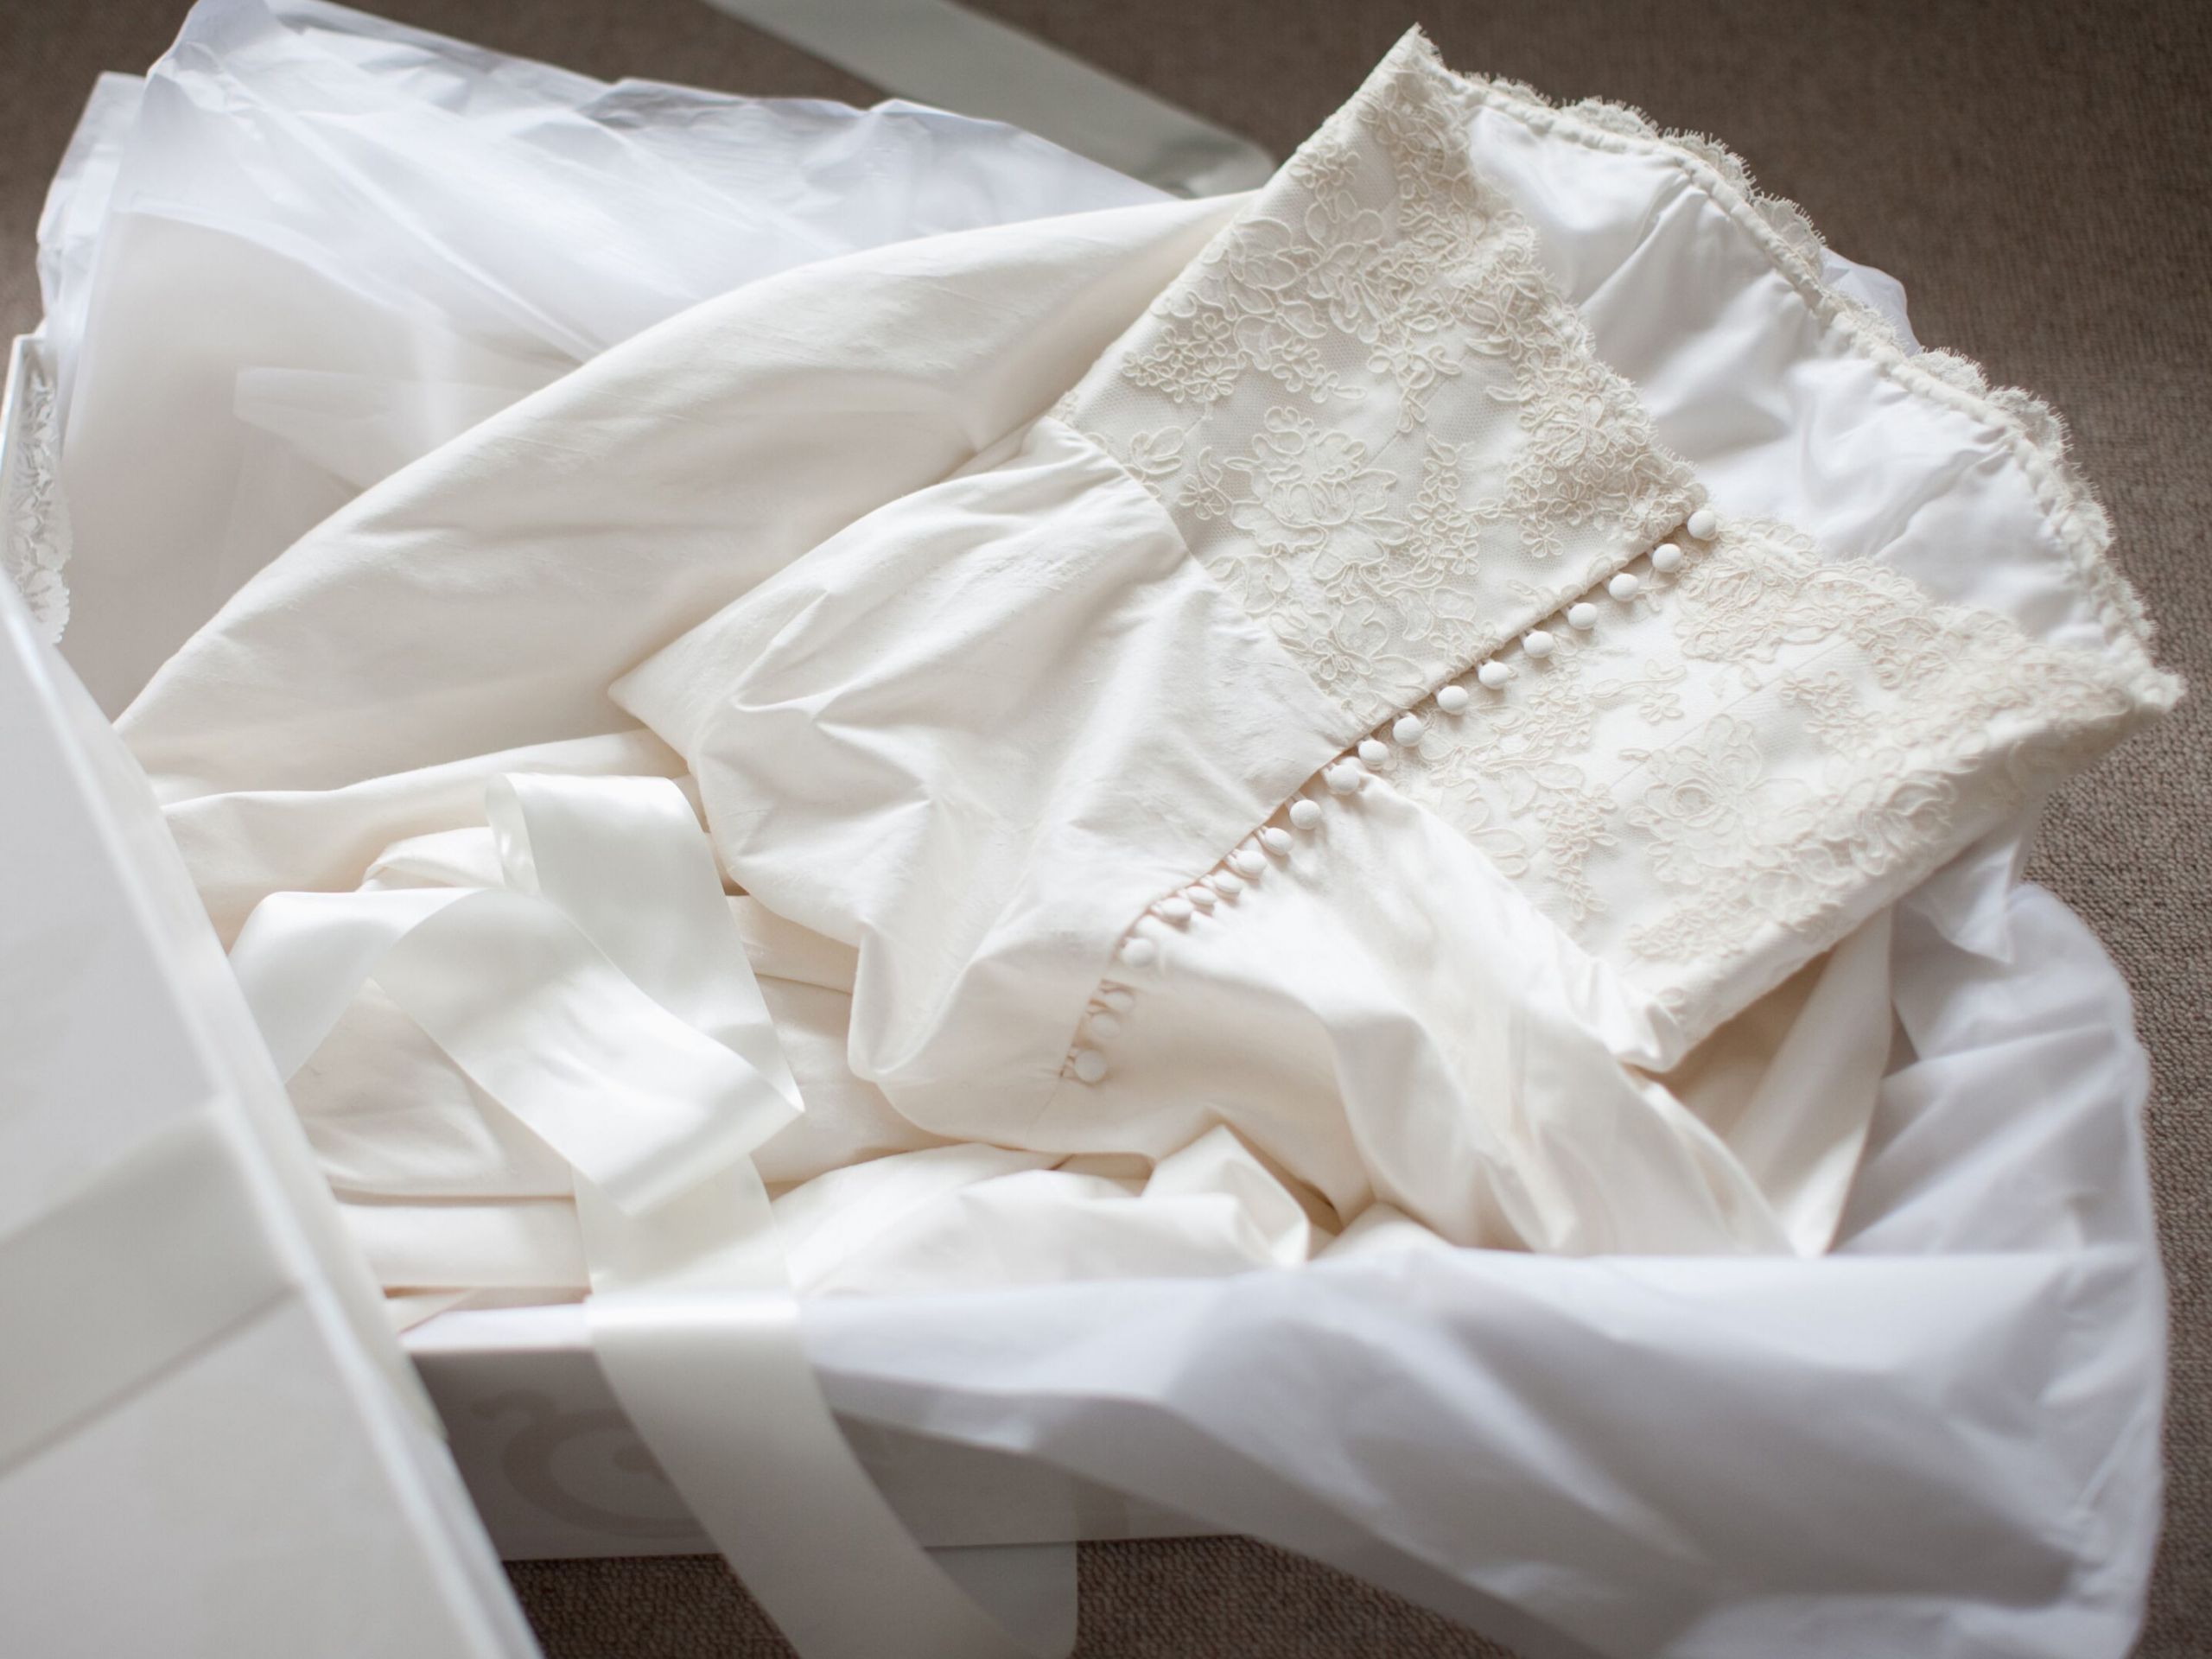 Preowned Wedding Dresses
 Used Wedding Dresses Where to Buy and Sell line